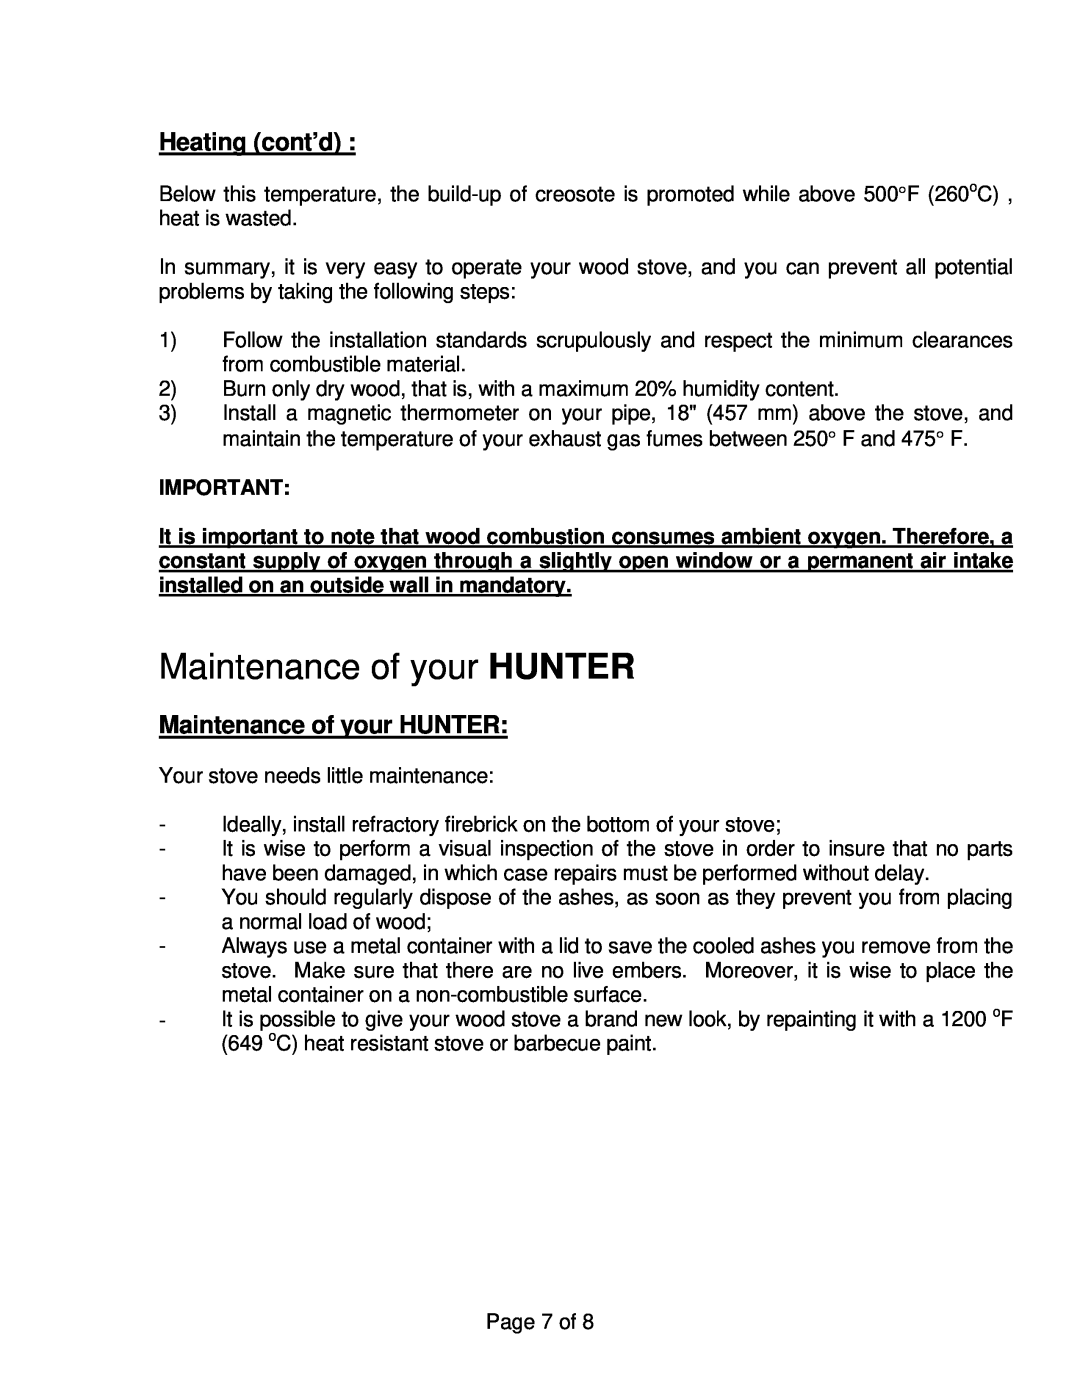 Drolet Hunter Wood Stove owner manual Maintenance of your HUNTER, Heating cont’d 